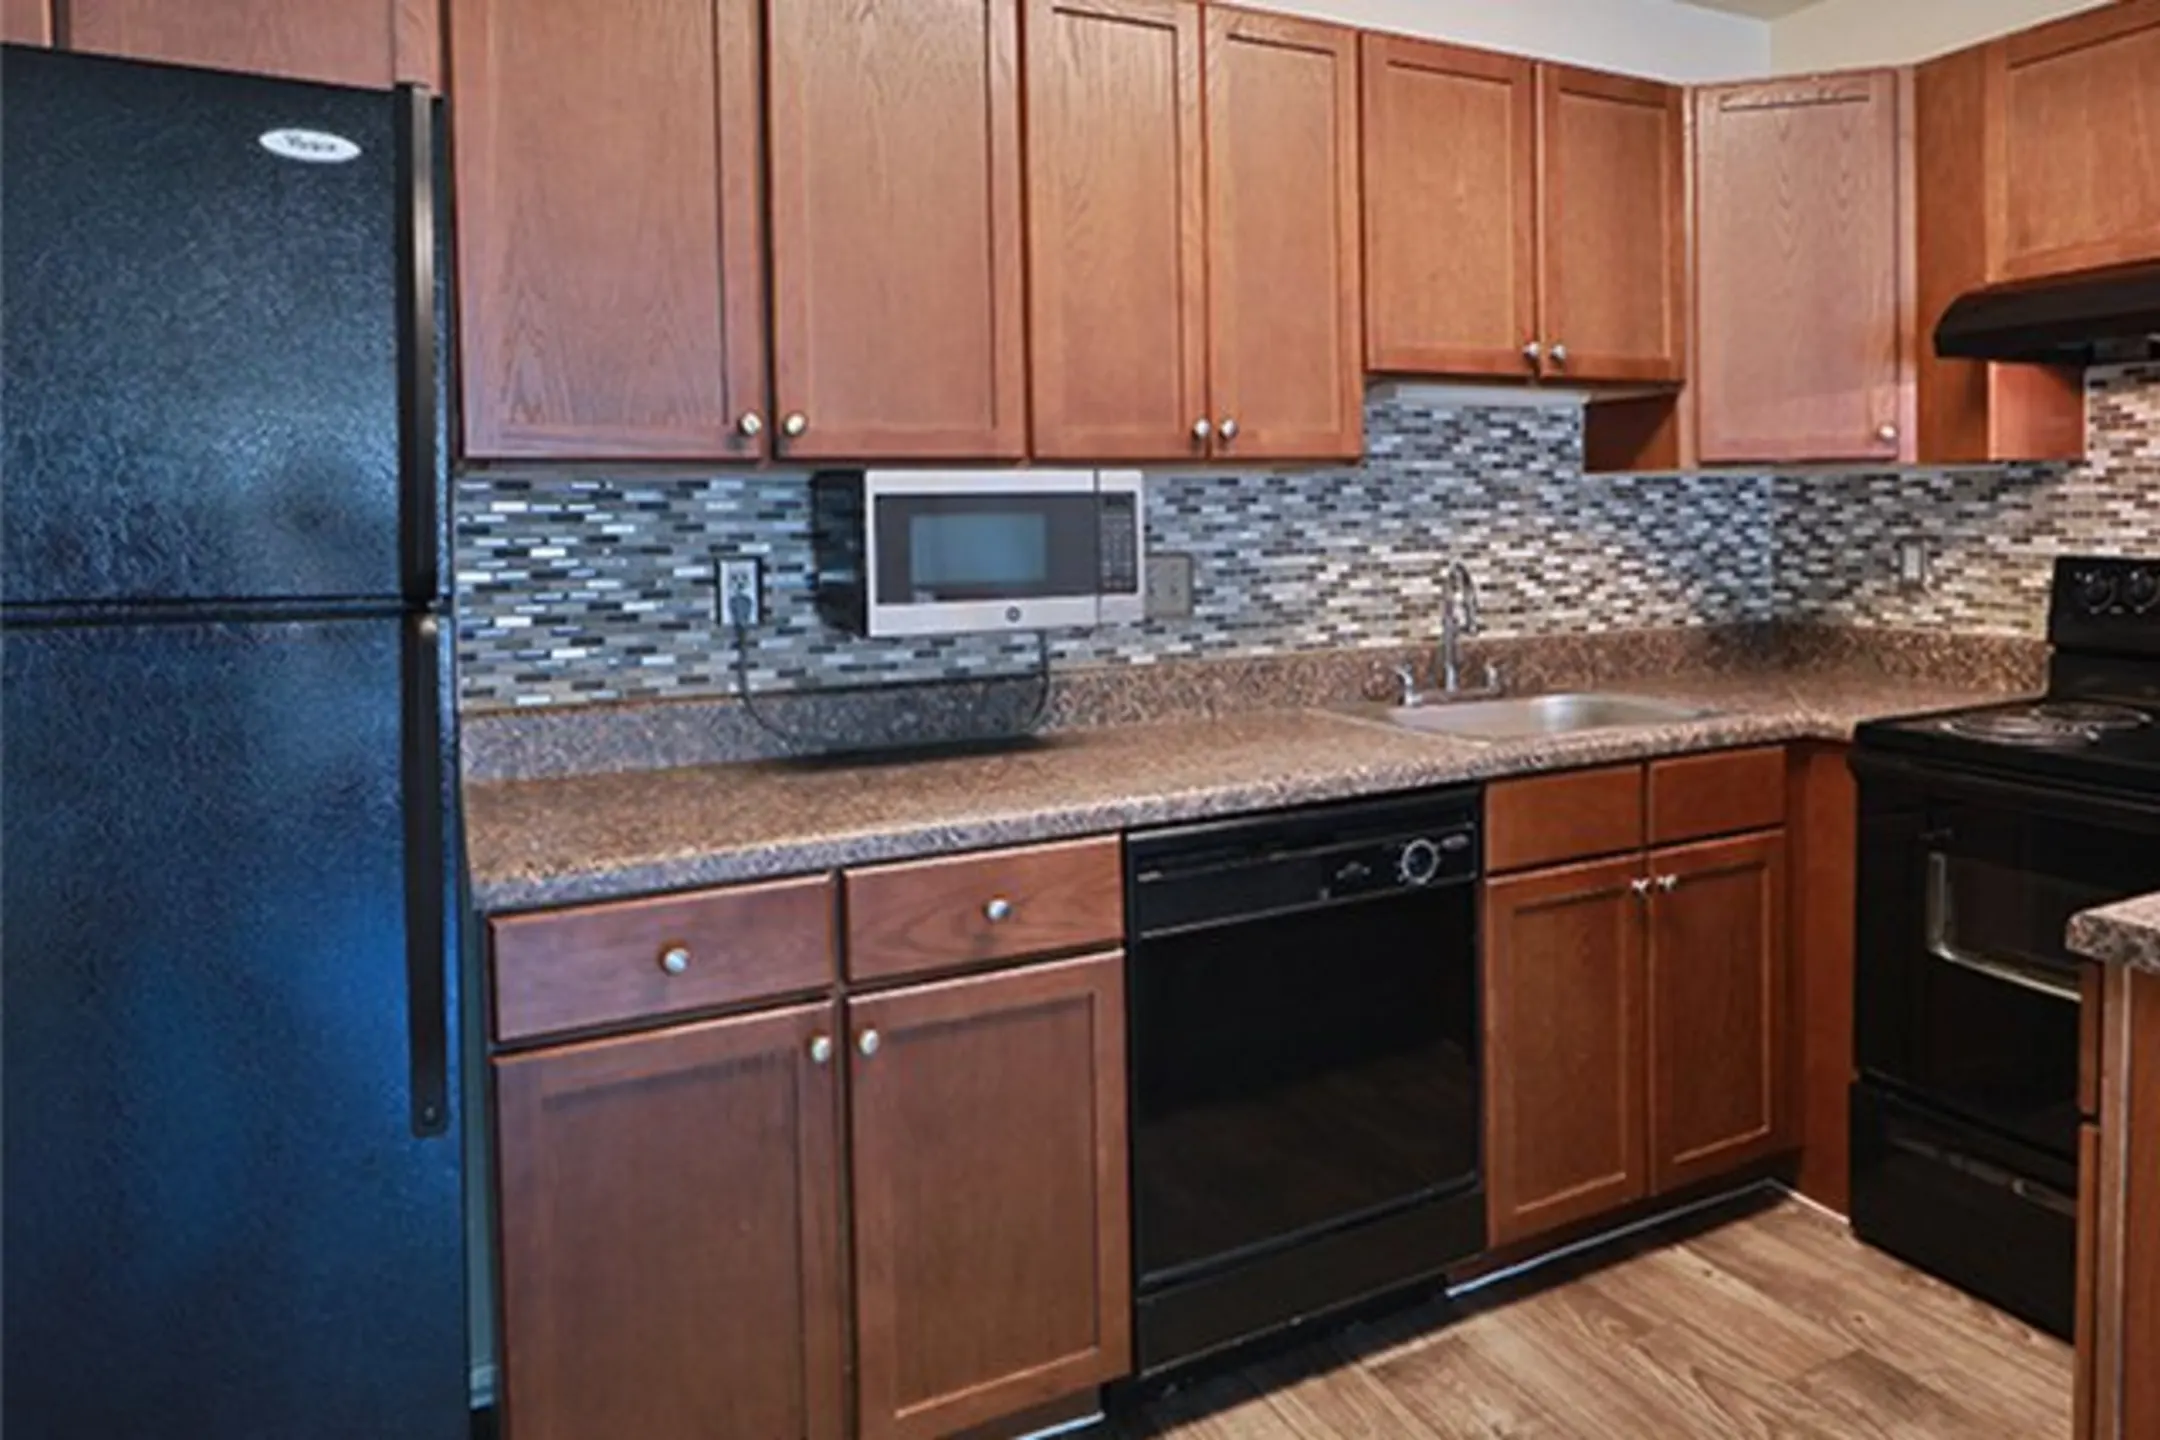 Kitchen - St. Mary's Landing Apartments and Townhomes - Lexington Park, MD